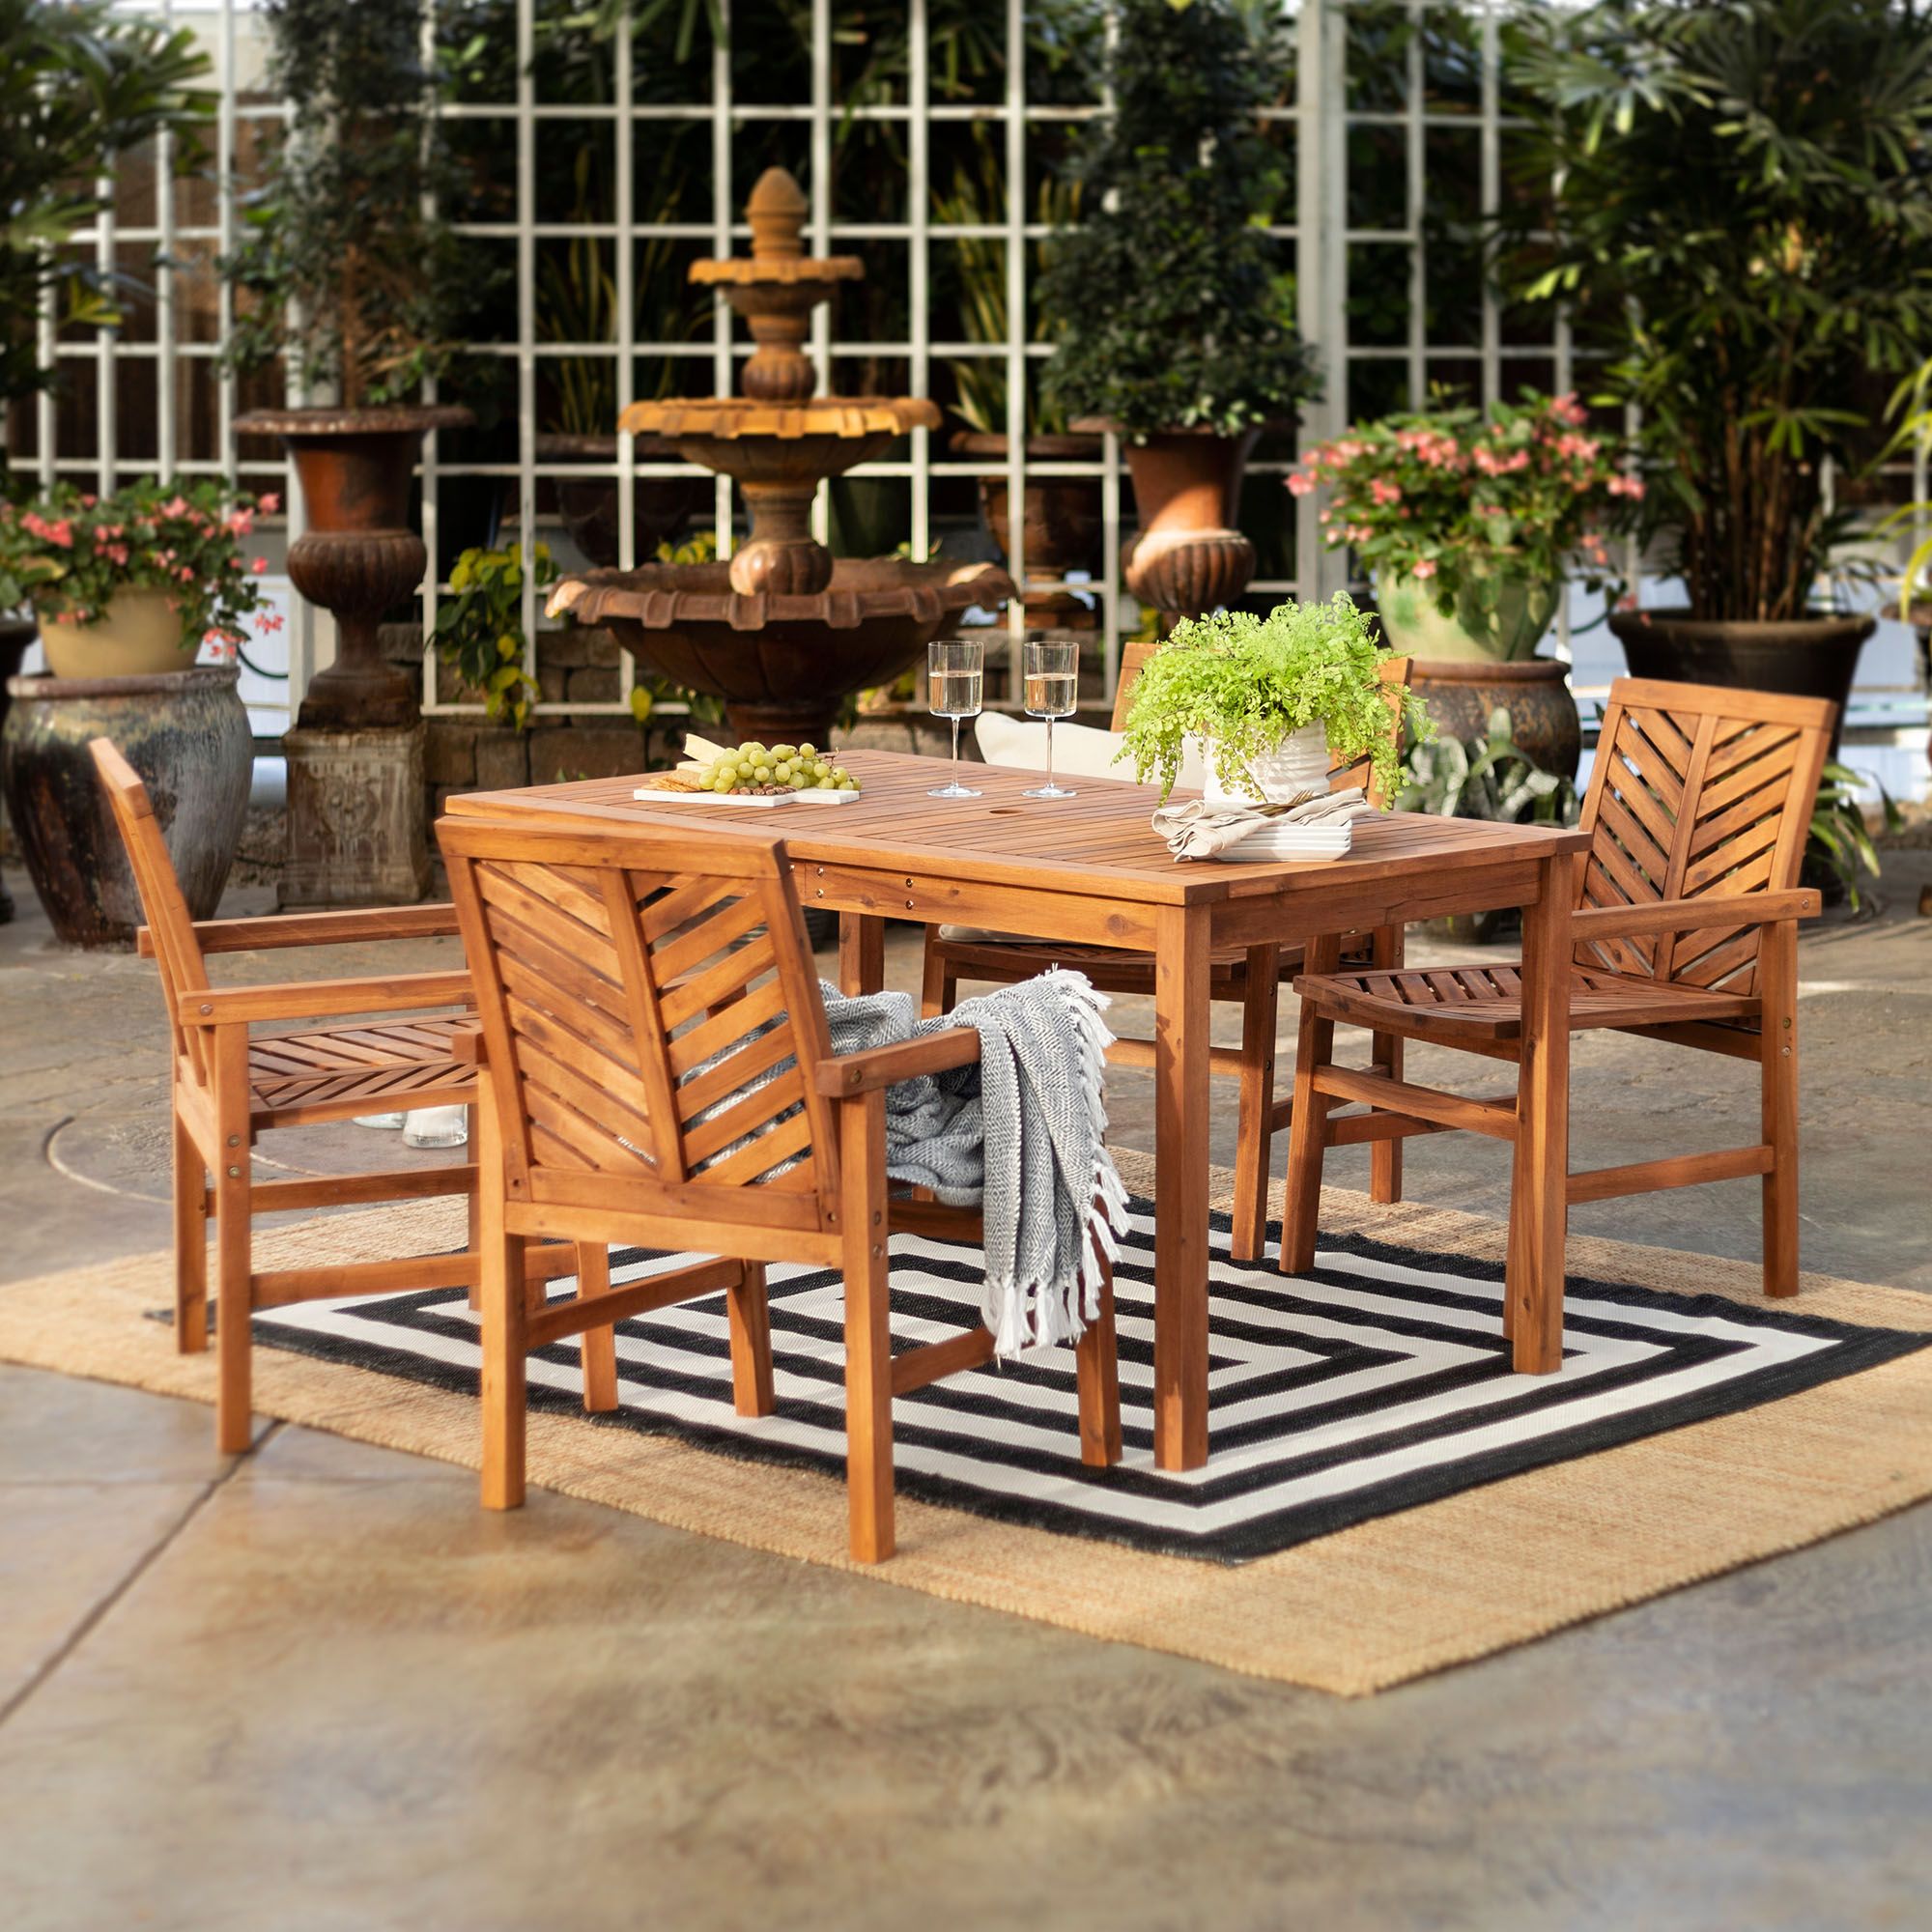 W. Trends 5-Pc. Patio Acacia Dining Set - Brown